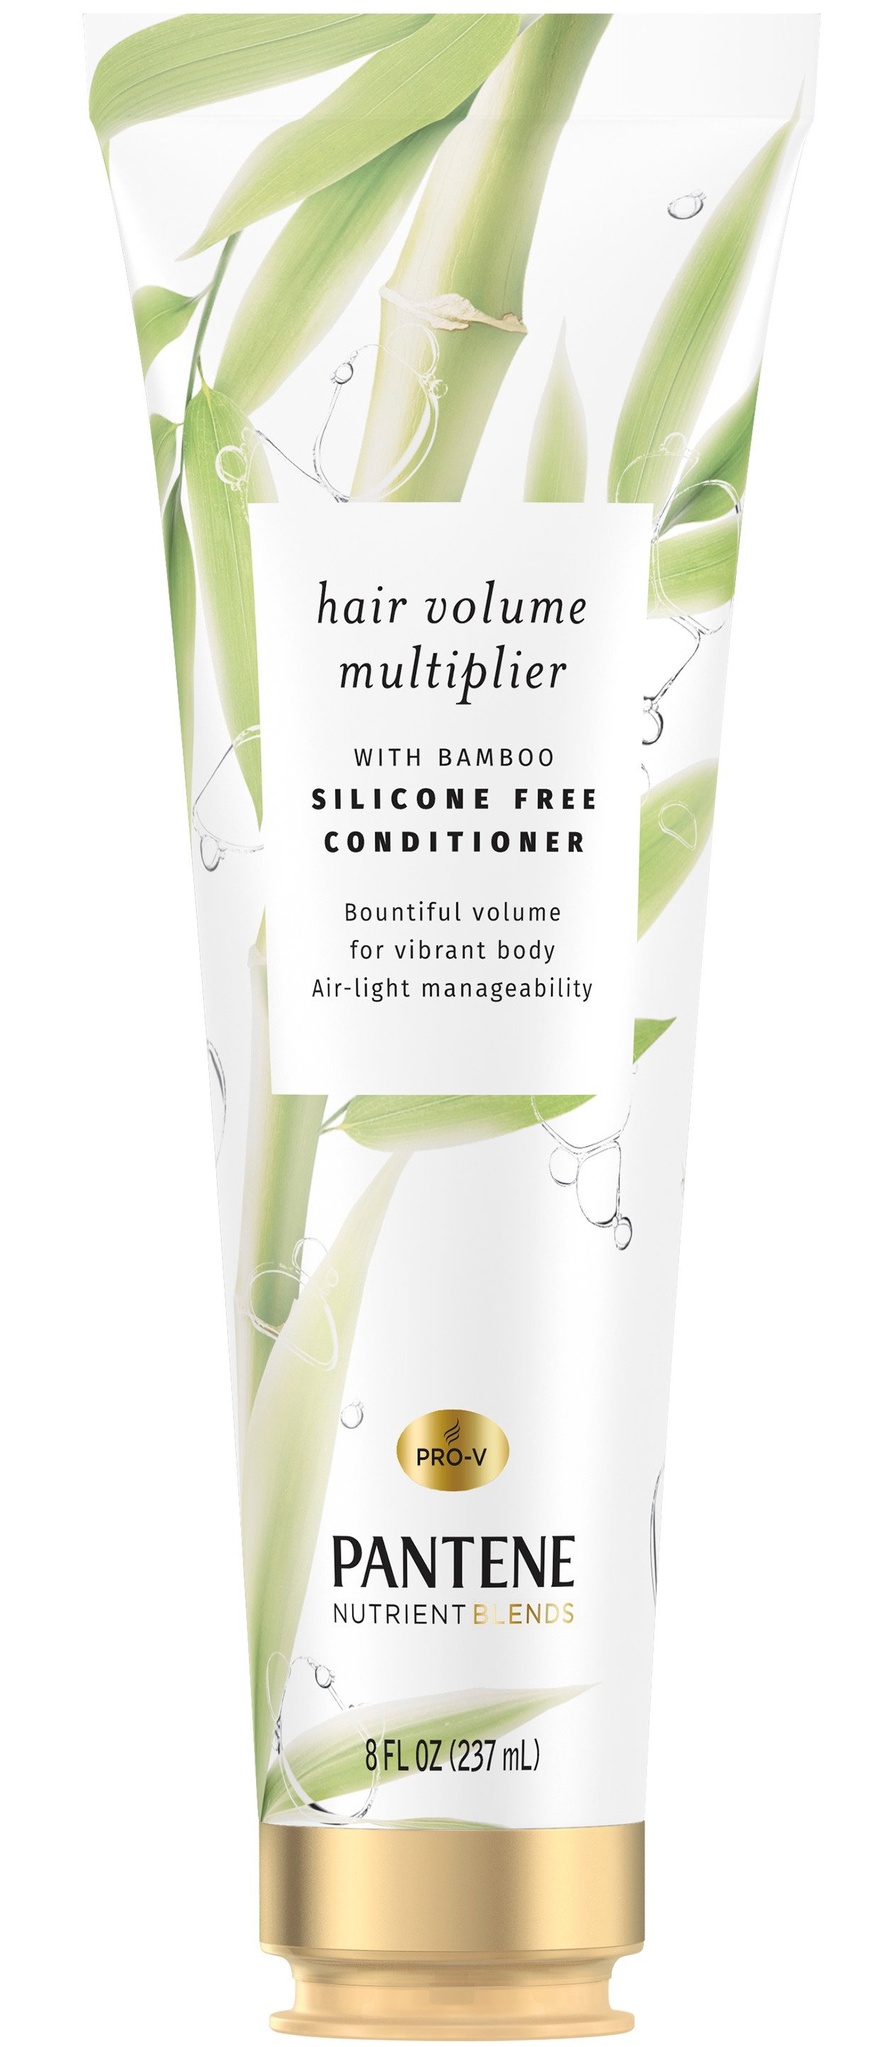 Pantene Nutrient Blends Hair Volume Multiplier Silicone Free Bamboo Conditioner